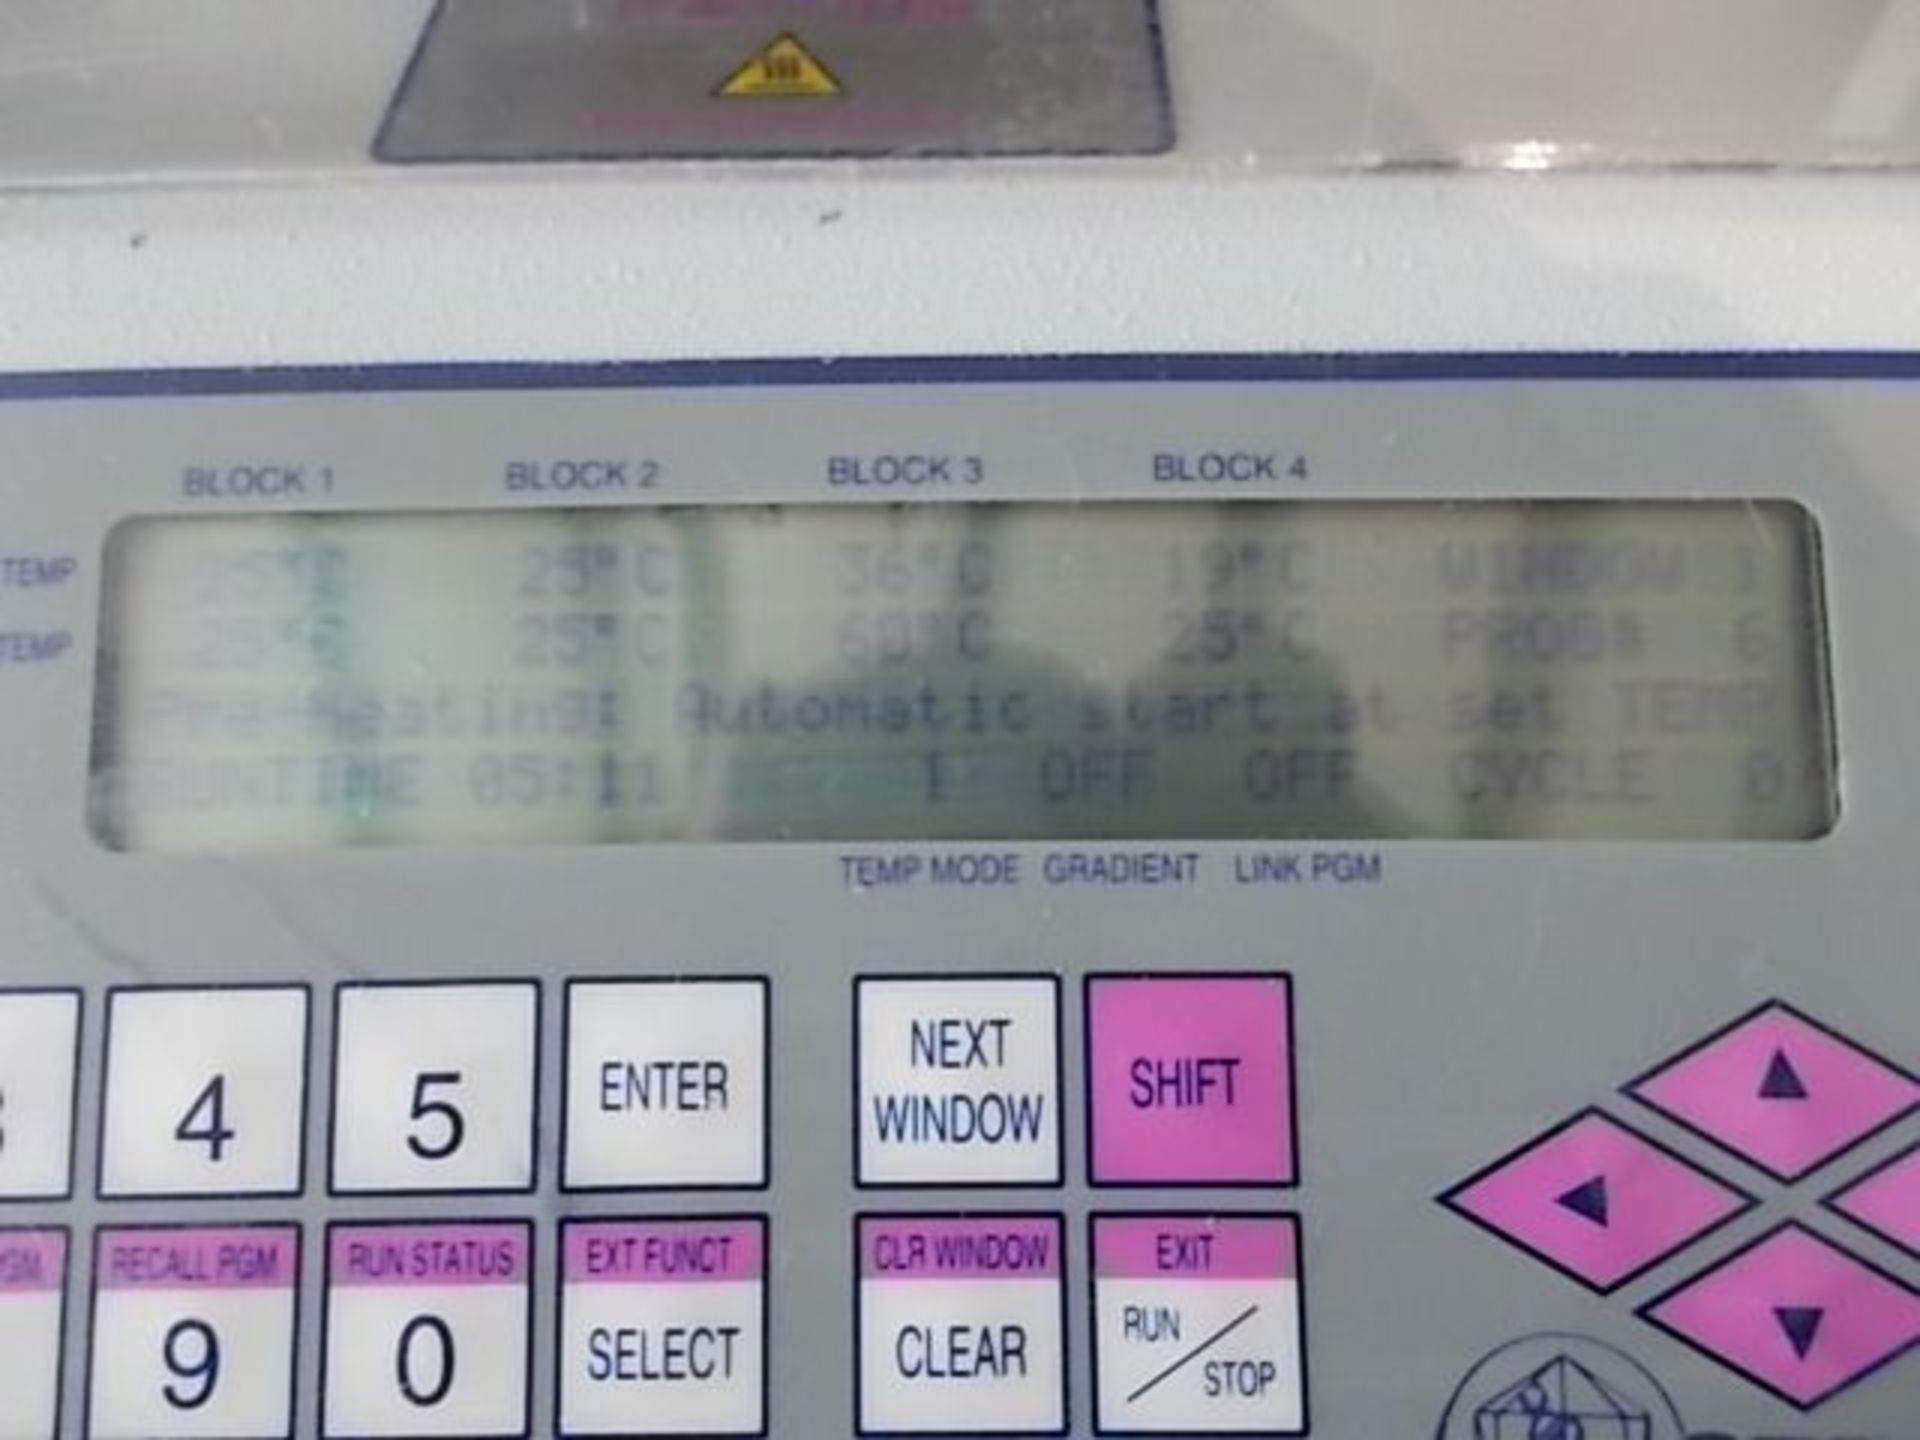 Stratagene Robocycler Gradient 40 Thermal Cycler PCR DNA With Hot Top, Qty 1, 330883751805 - Image 3 of 12